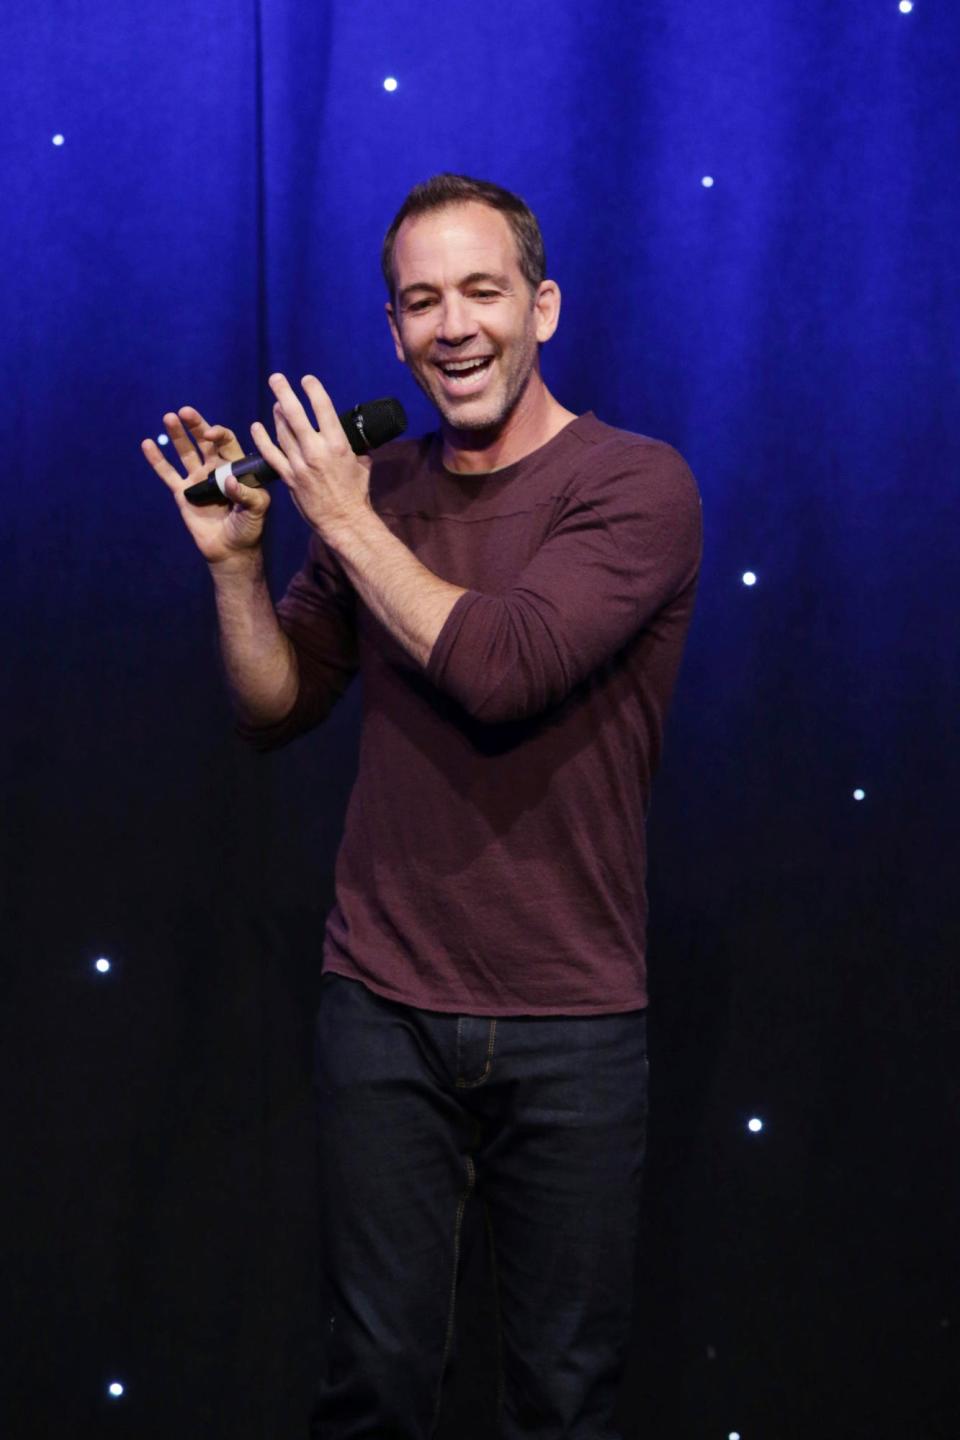 Comedian Bryan Callen brings his "Unreasonable Tour" to the King Center on Sept. 23.